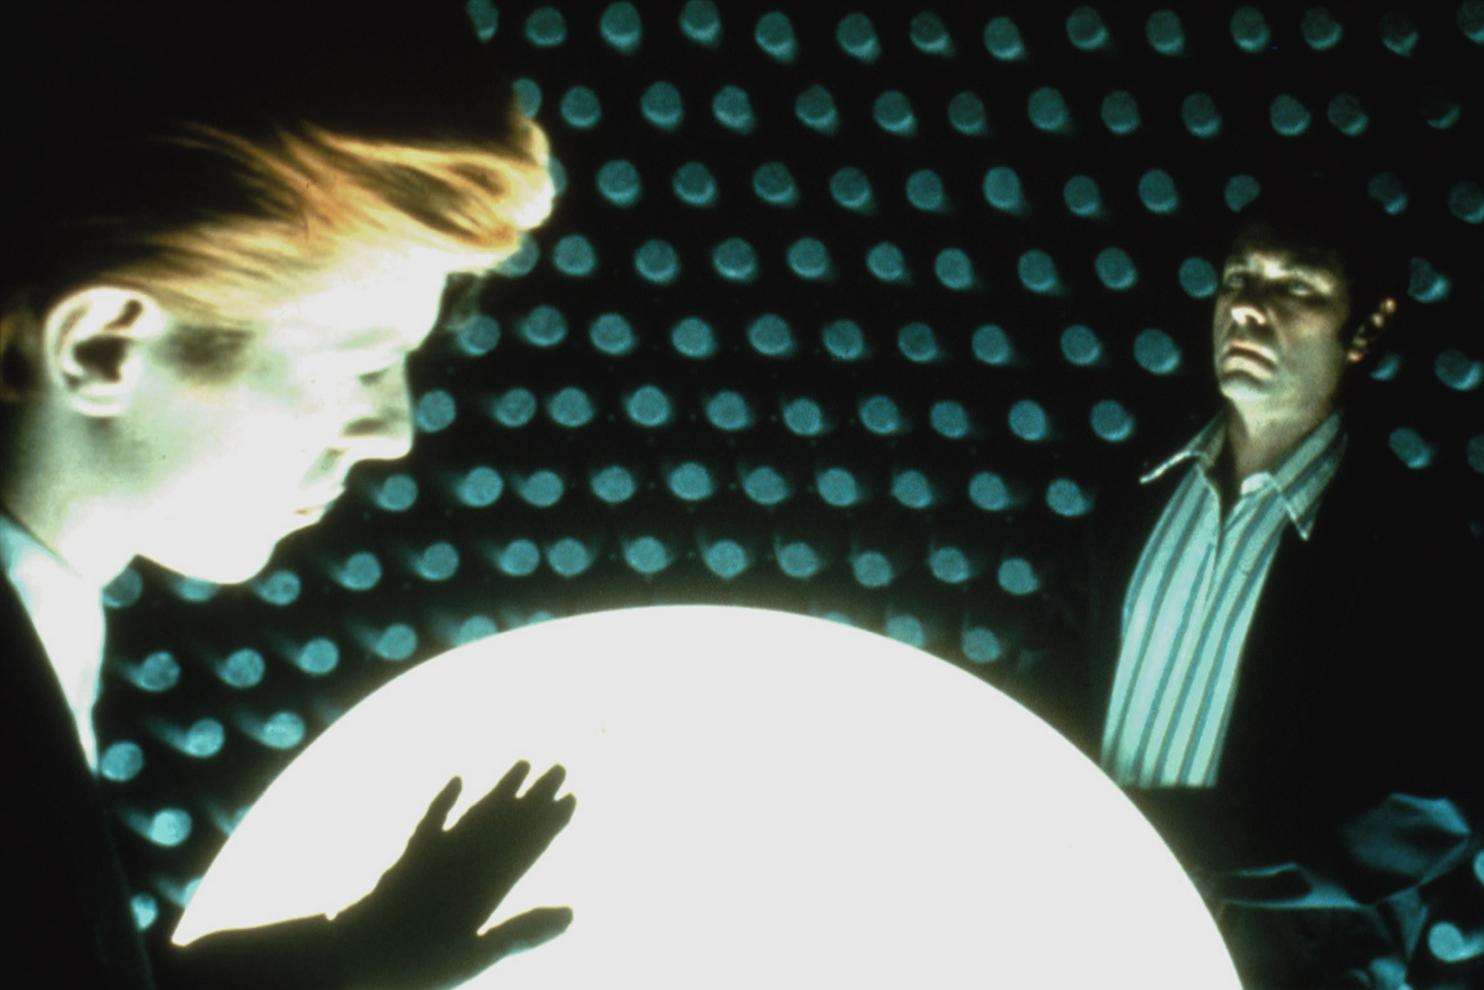 David Bowie and Rip Torn in the film The Man Who Fell To Earth, to be shown in Folkestone's Quarterhouse